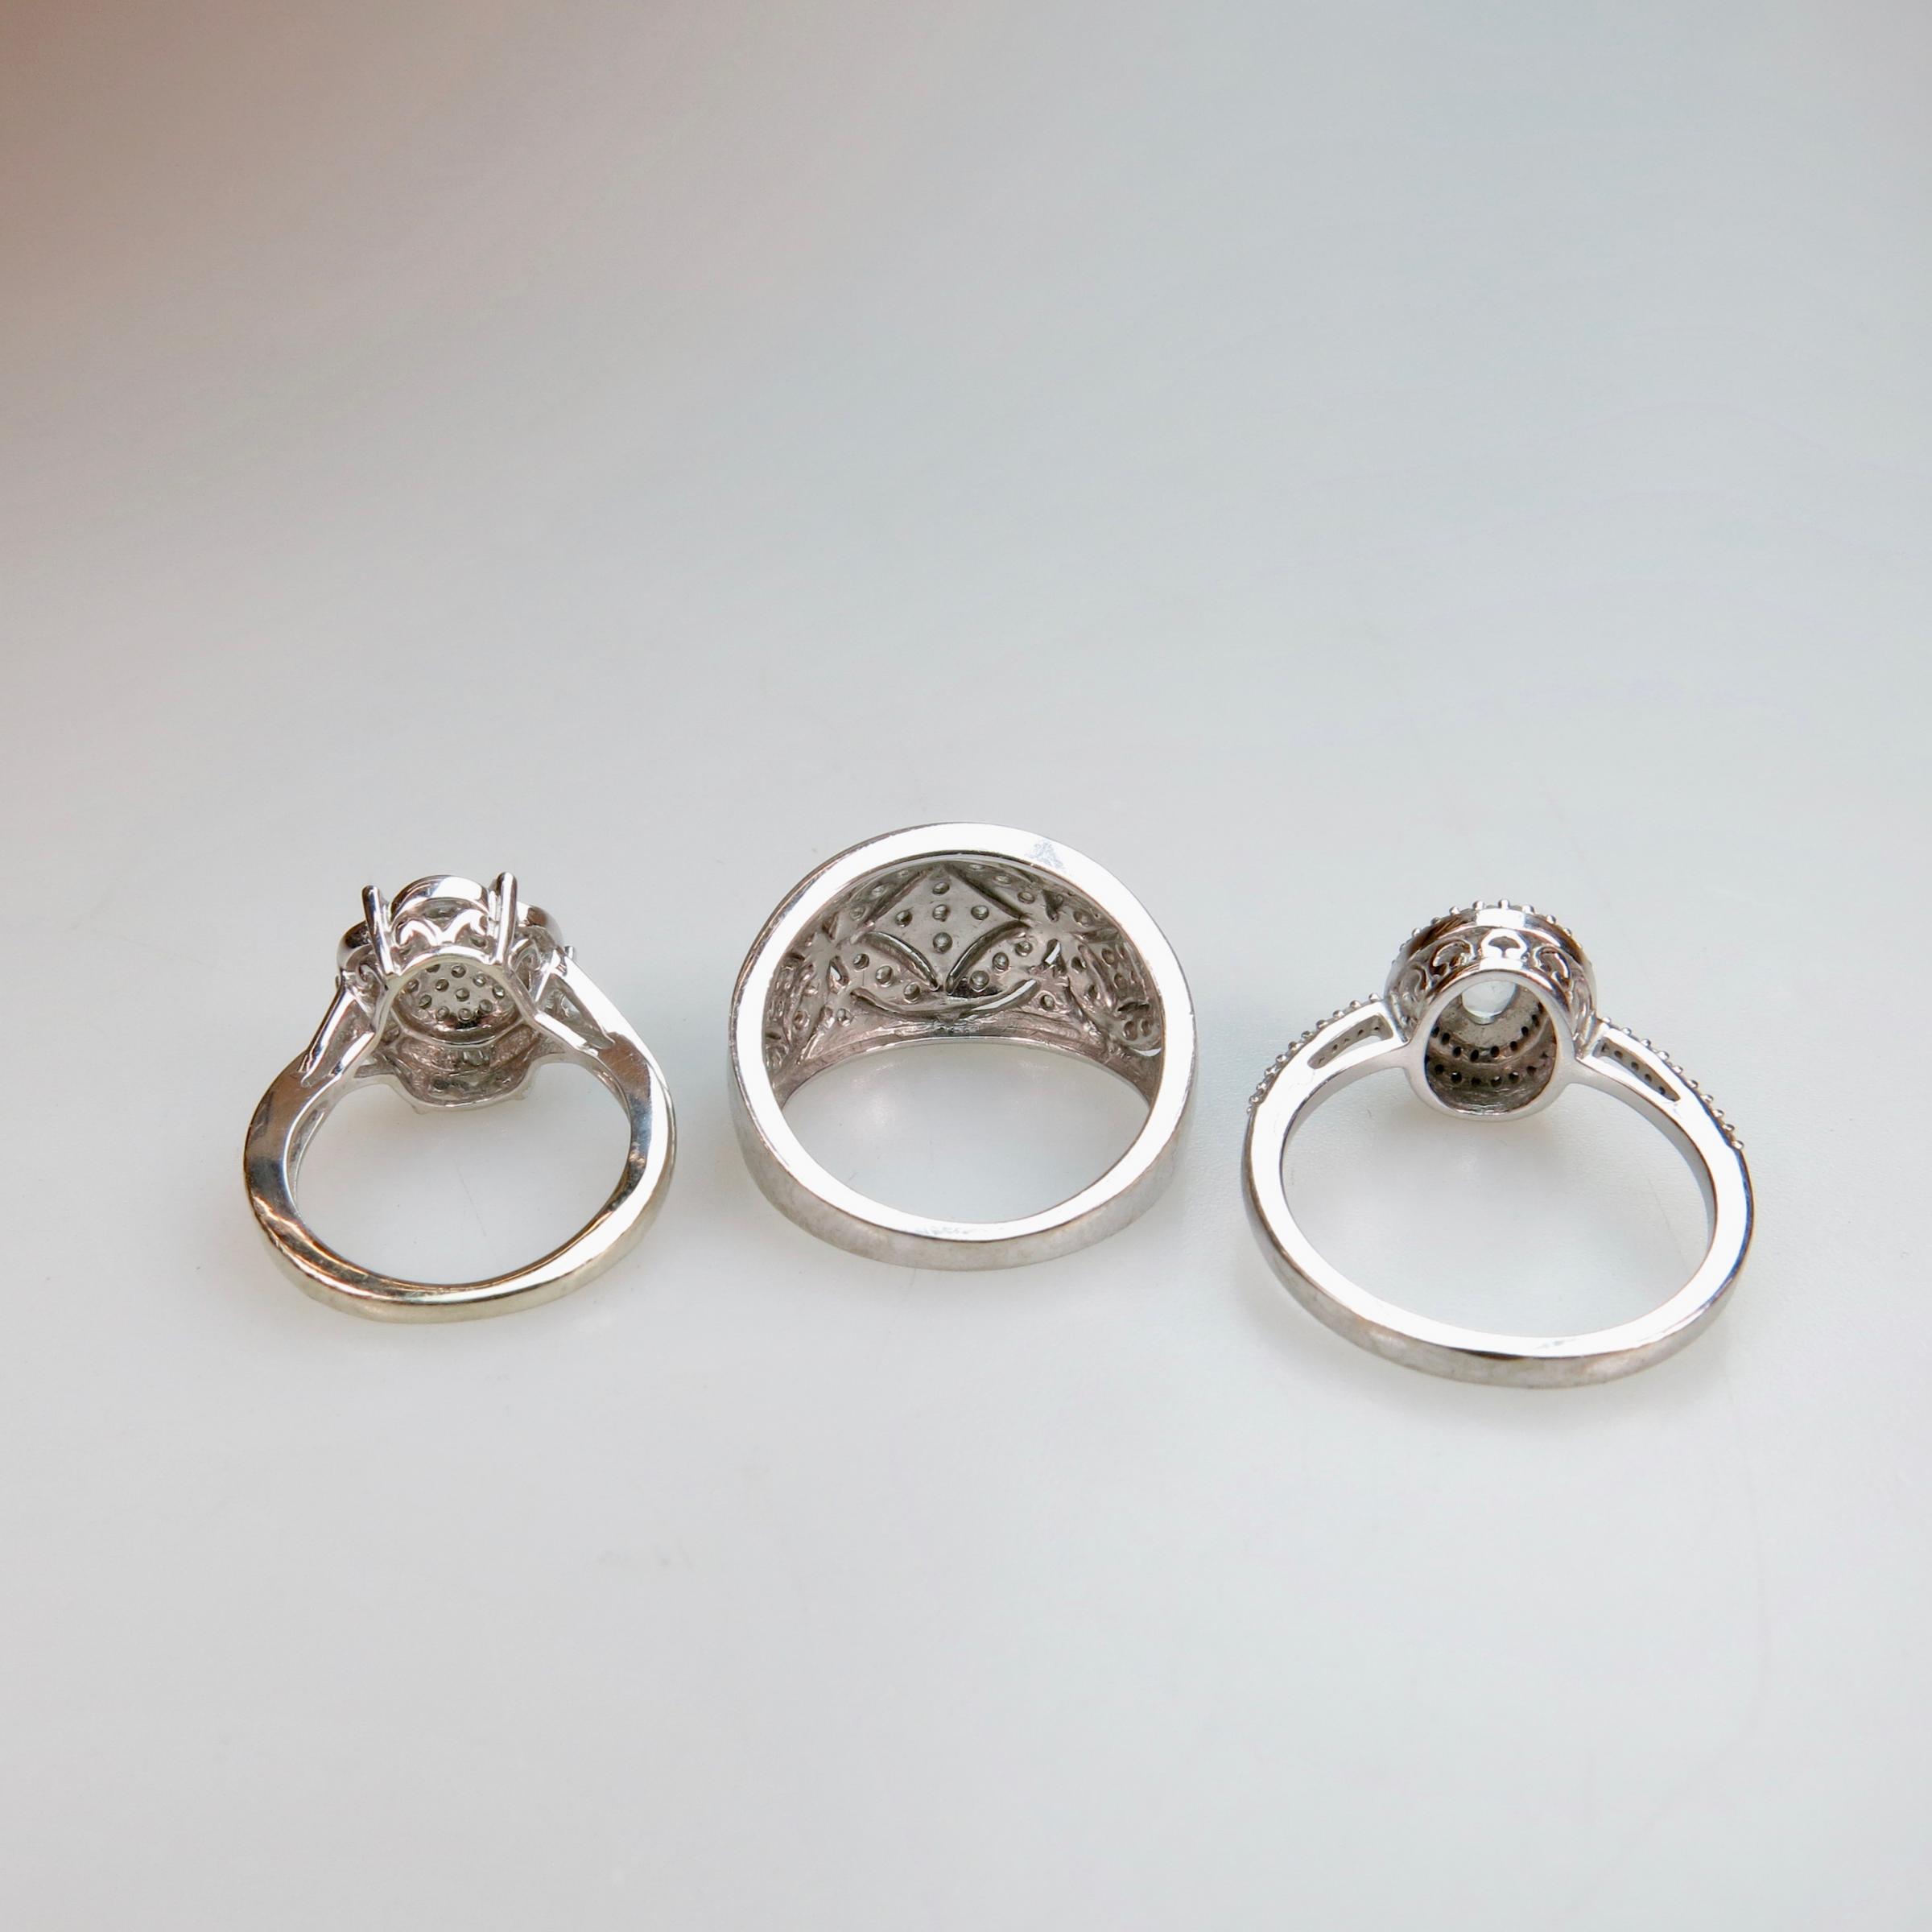 1 x 14k And 2 x 10k White Gold Rings